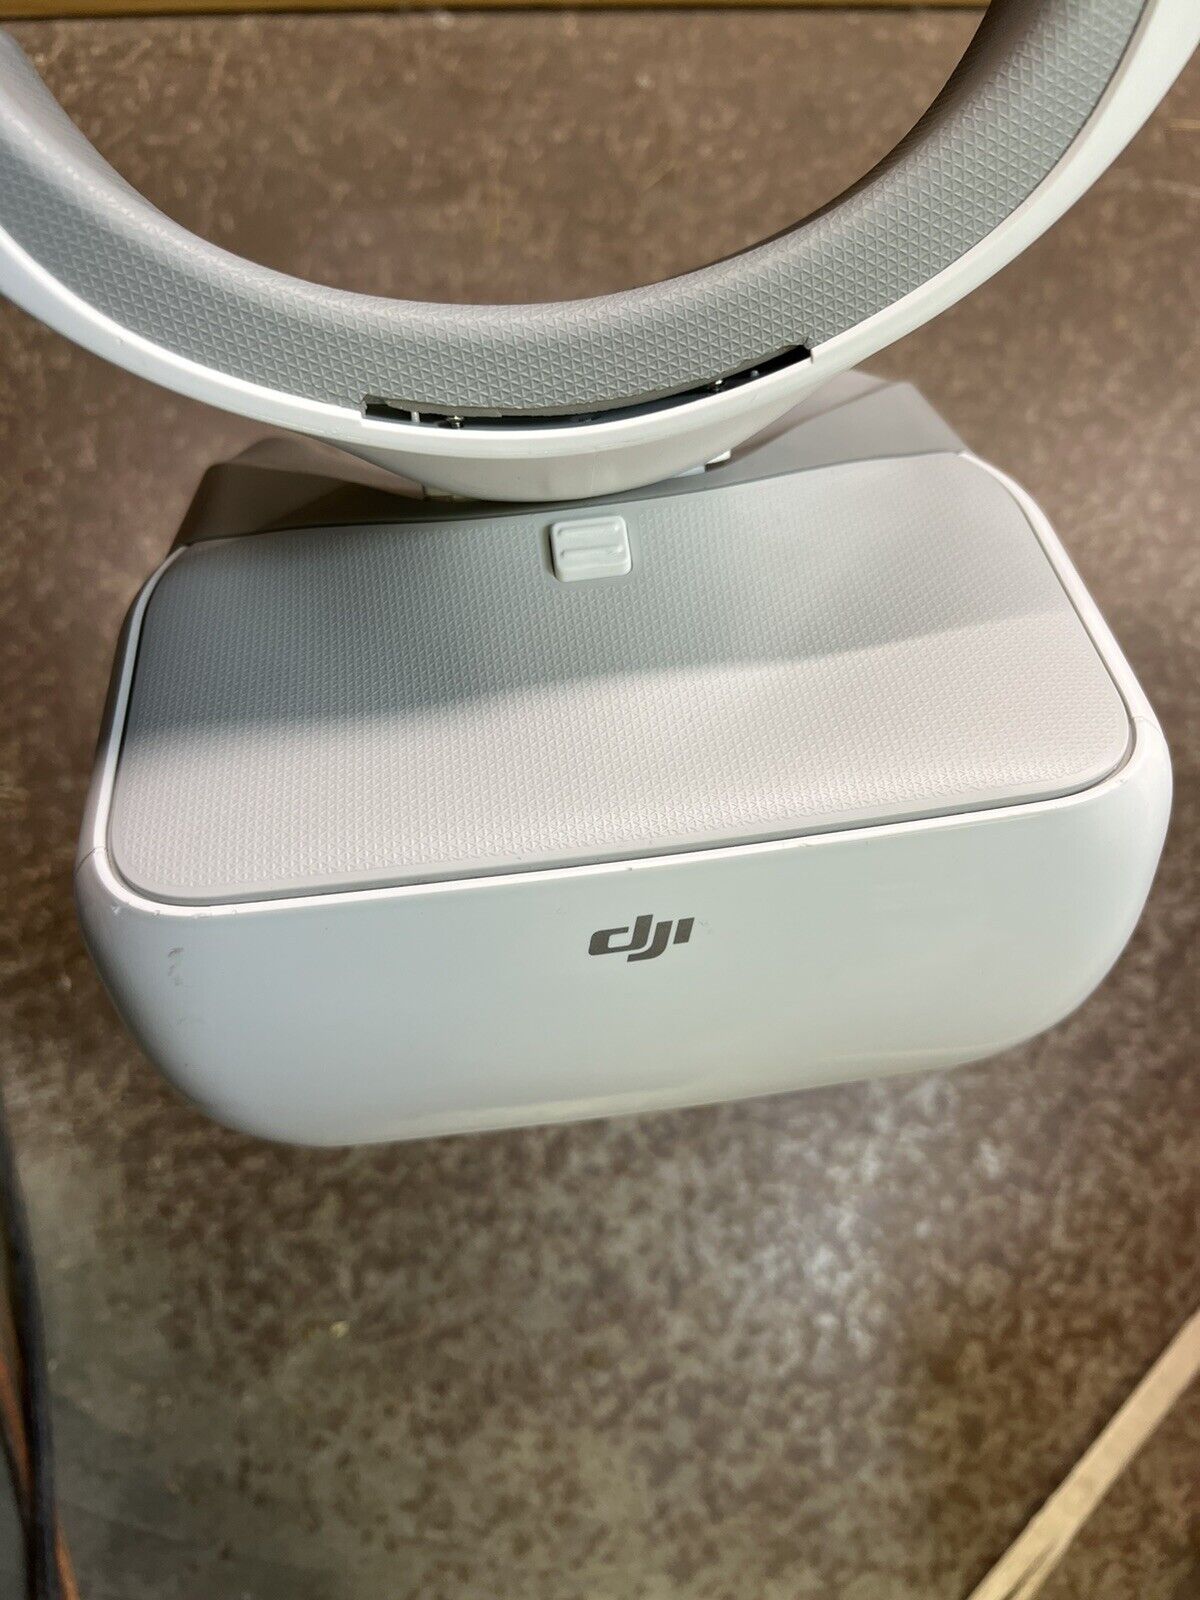 DJI Goggles HD FPV Headset for Drone Flying